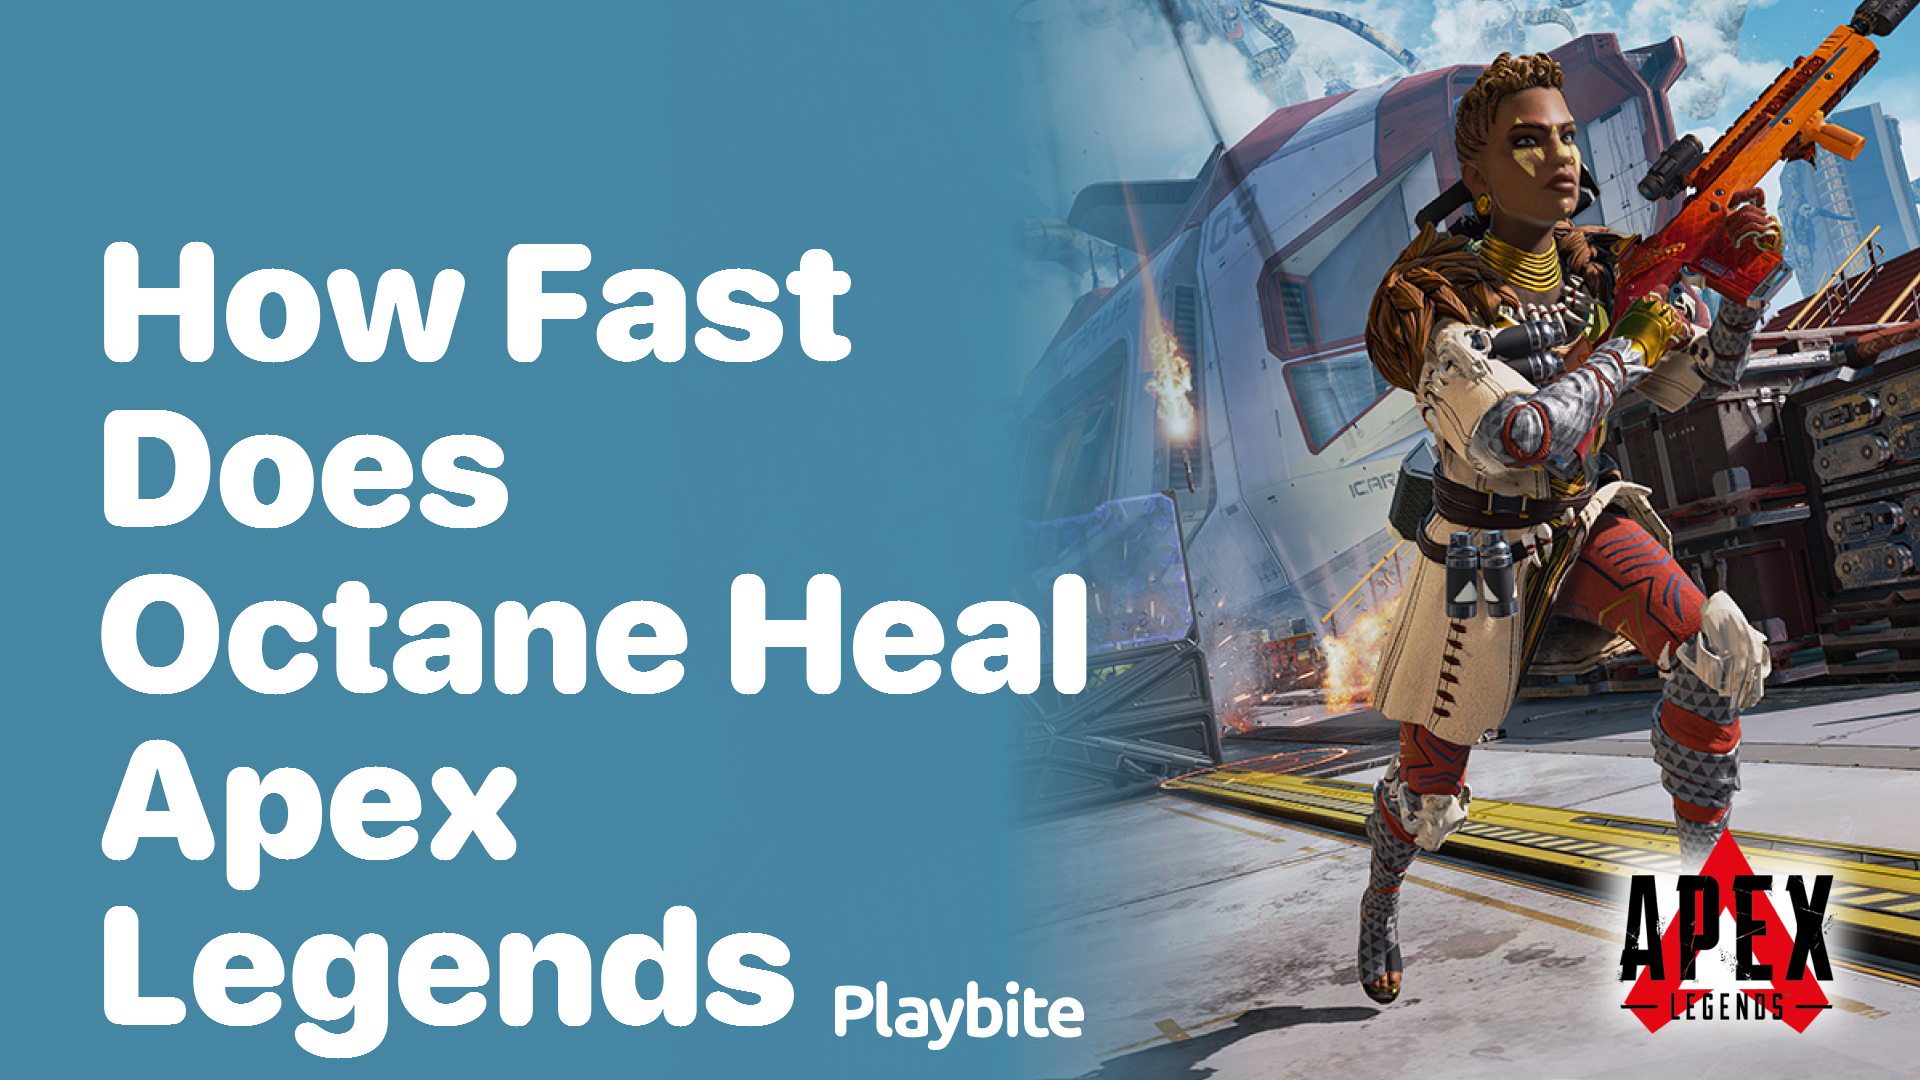 How fast does Octane heal in Apex Legends?